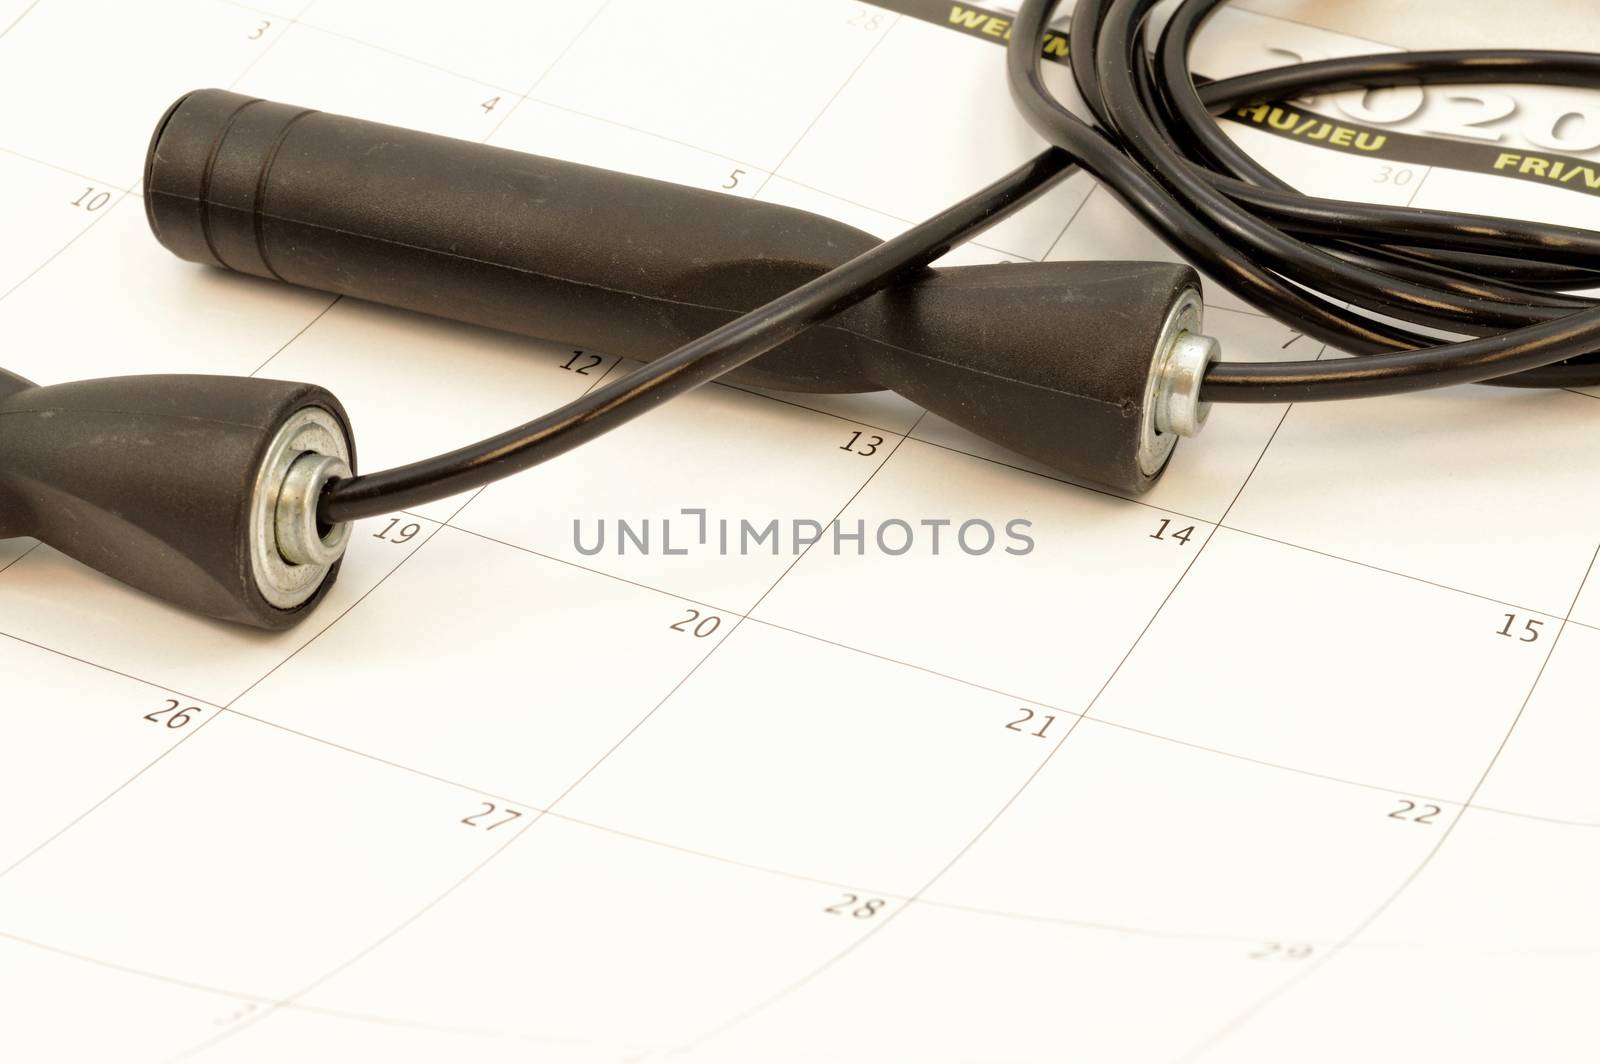 A skipping rope and calender represent a gym routine.